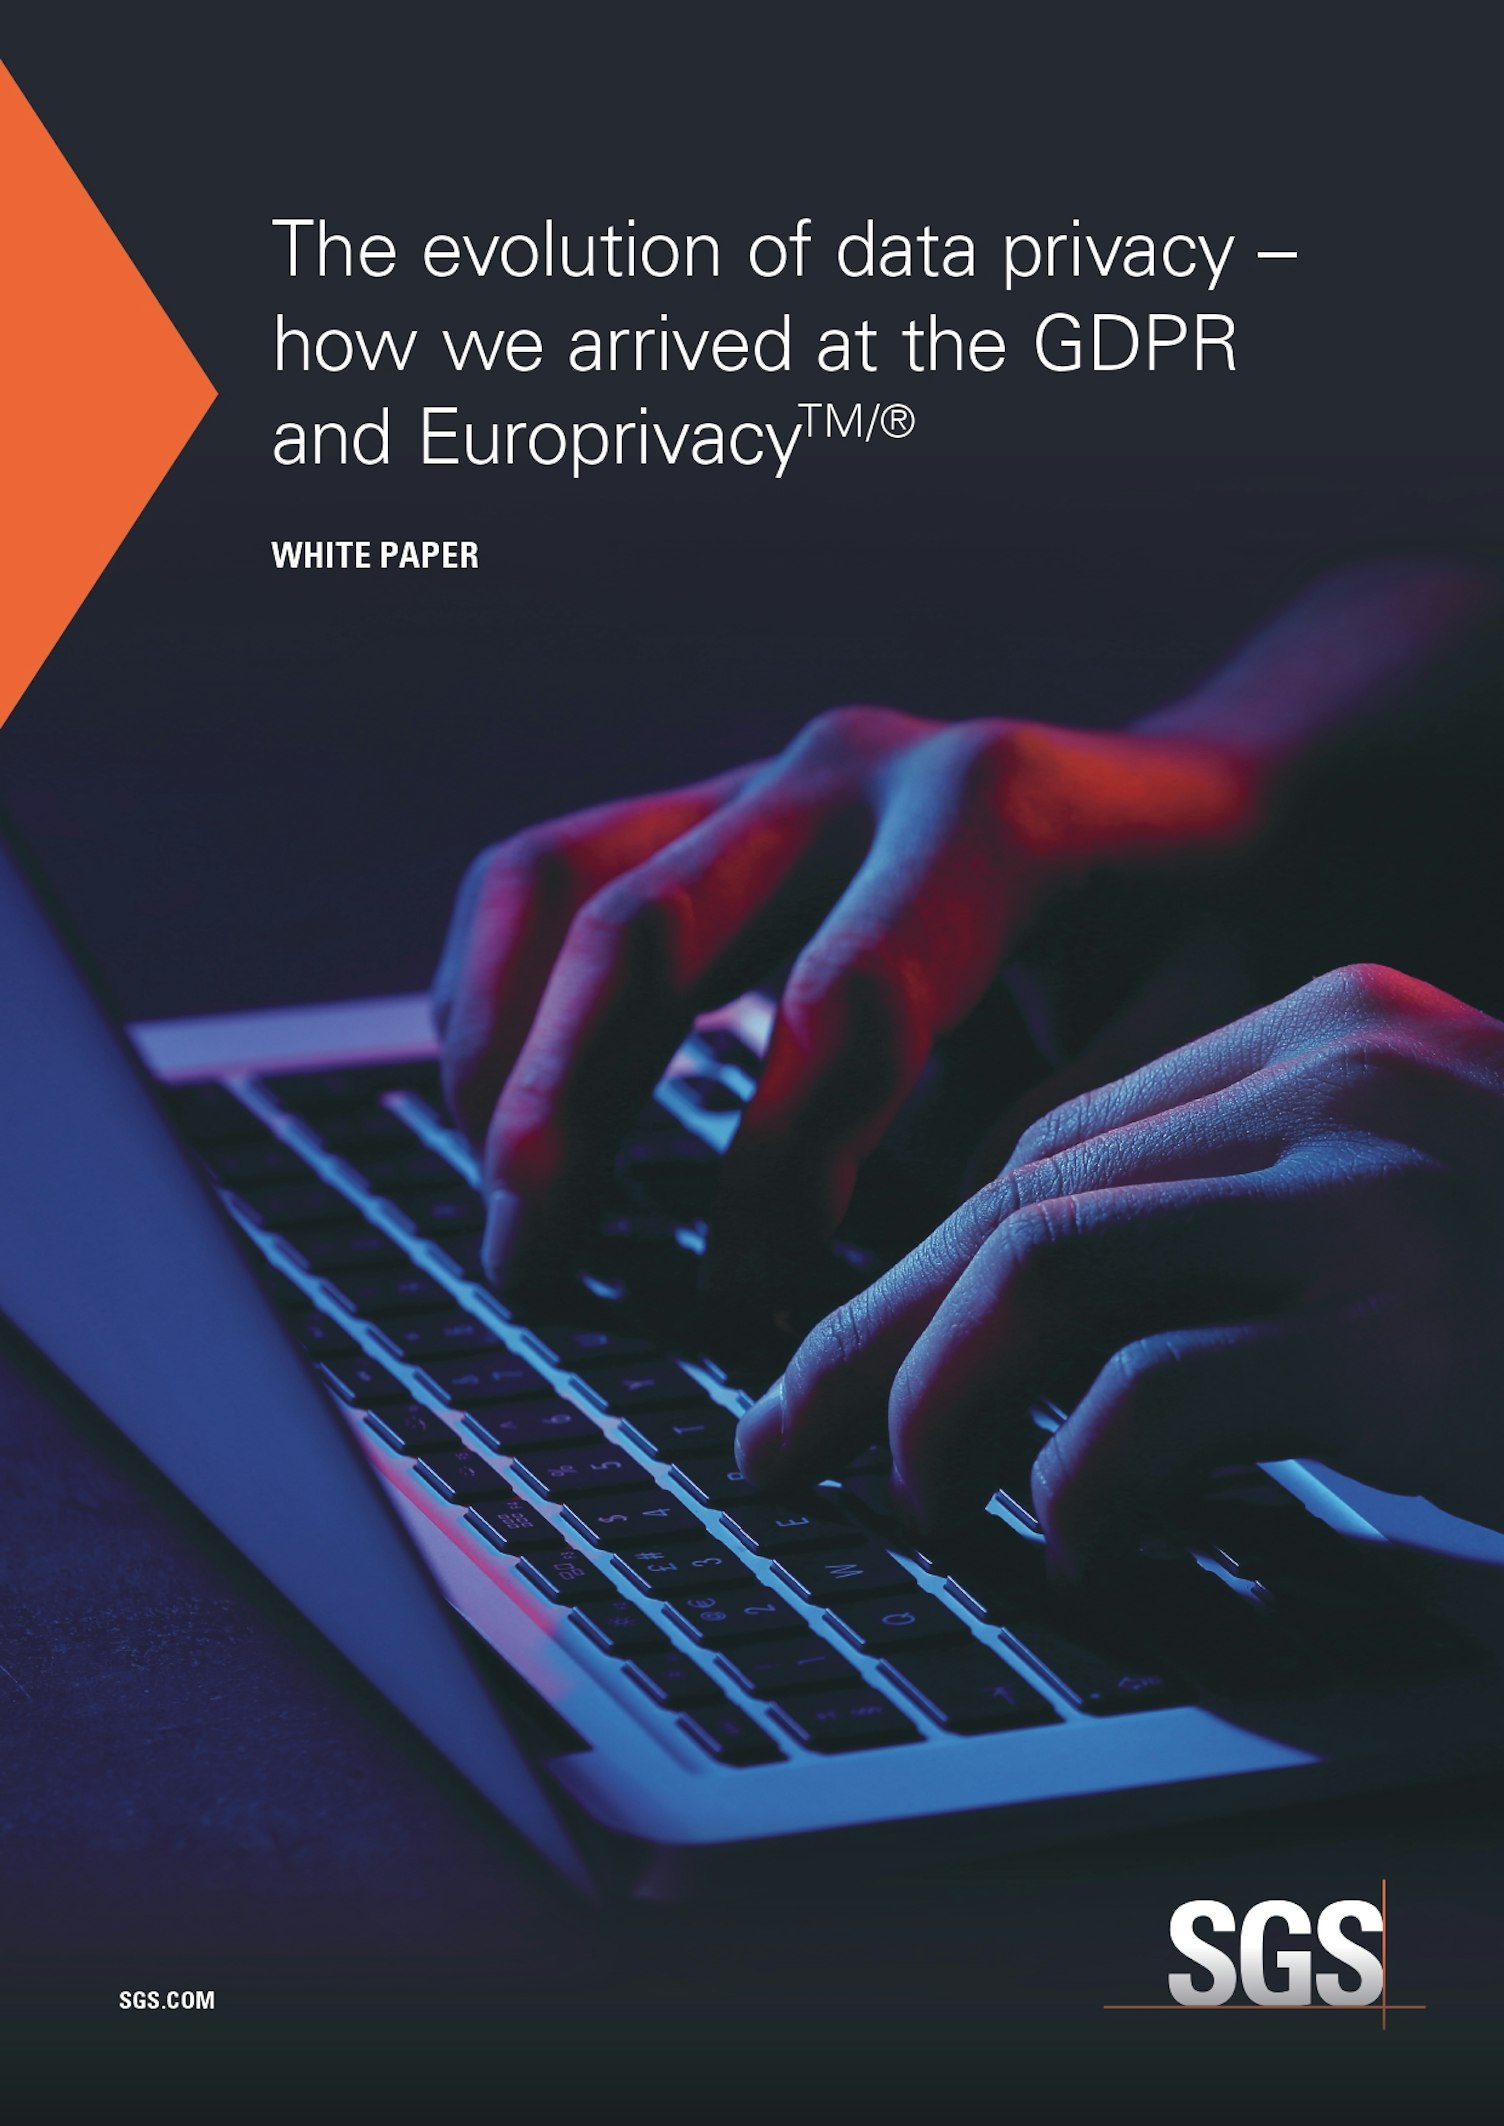 SGS KN The Evolution of Data Privacy How We Arrived at the GDPR and Europrivacy EN